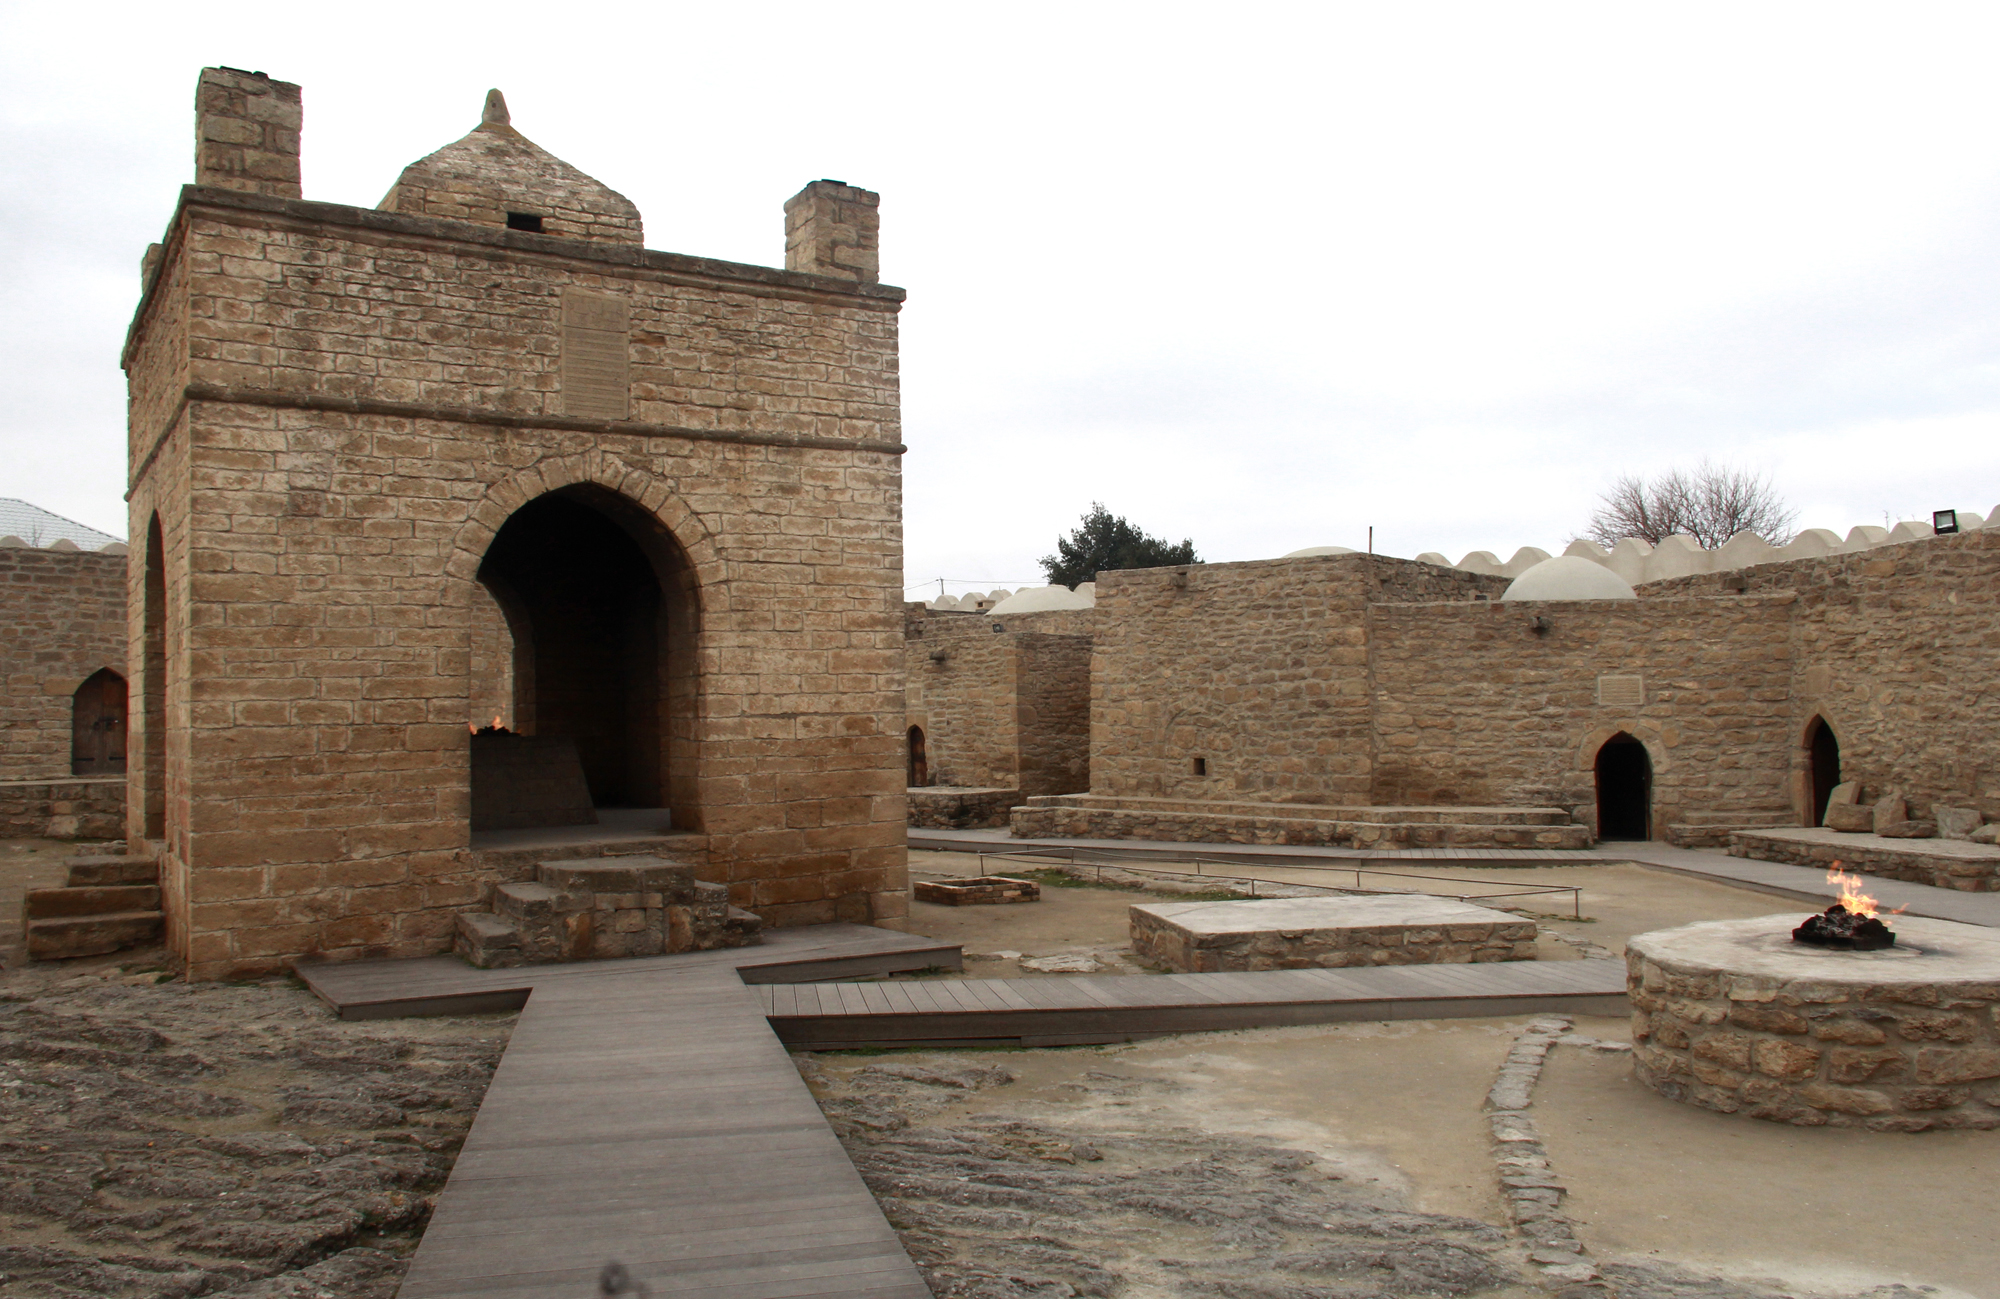 the fire temple complex built in 4 phases, made more than 400 years ago by Indians when Baku as part of the silk trade route, the fire is still on since it built. 